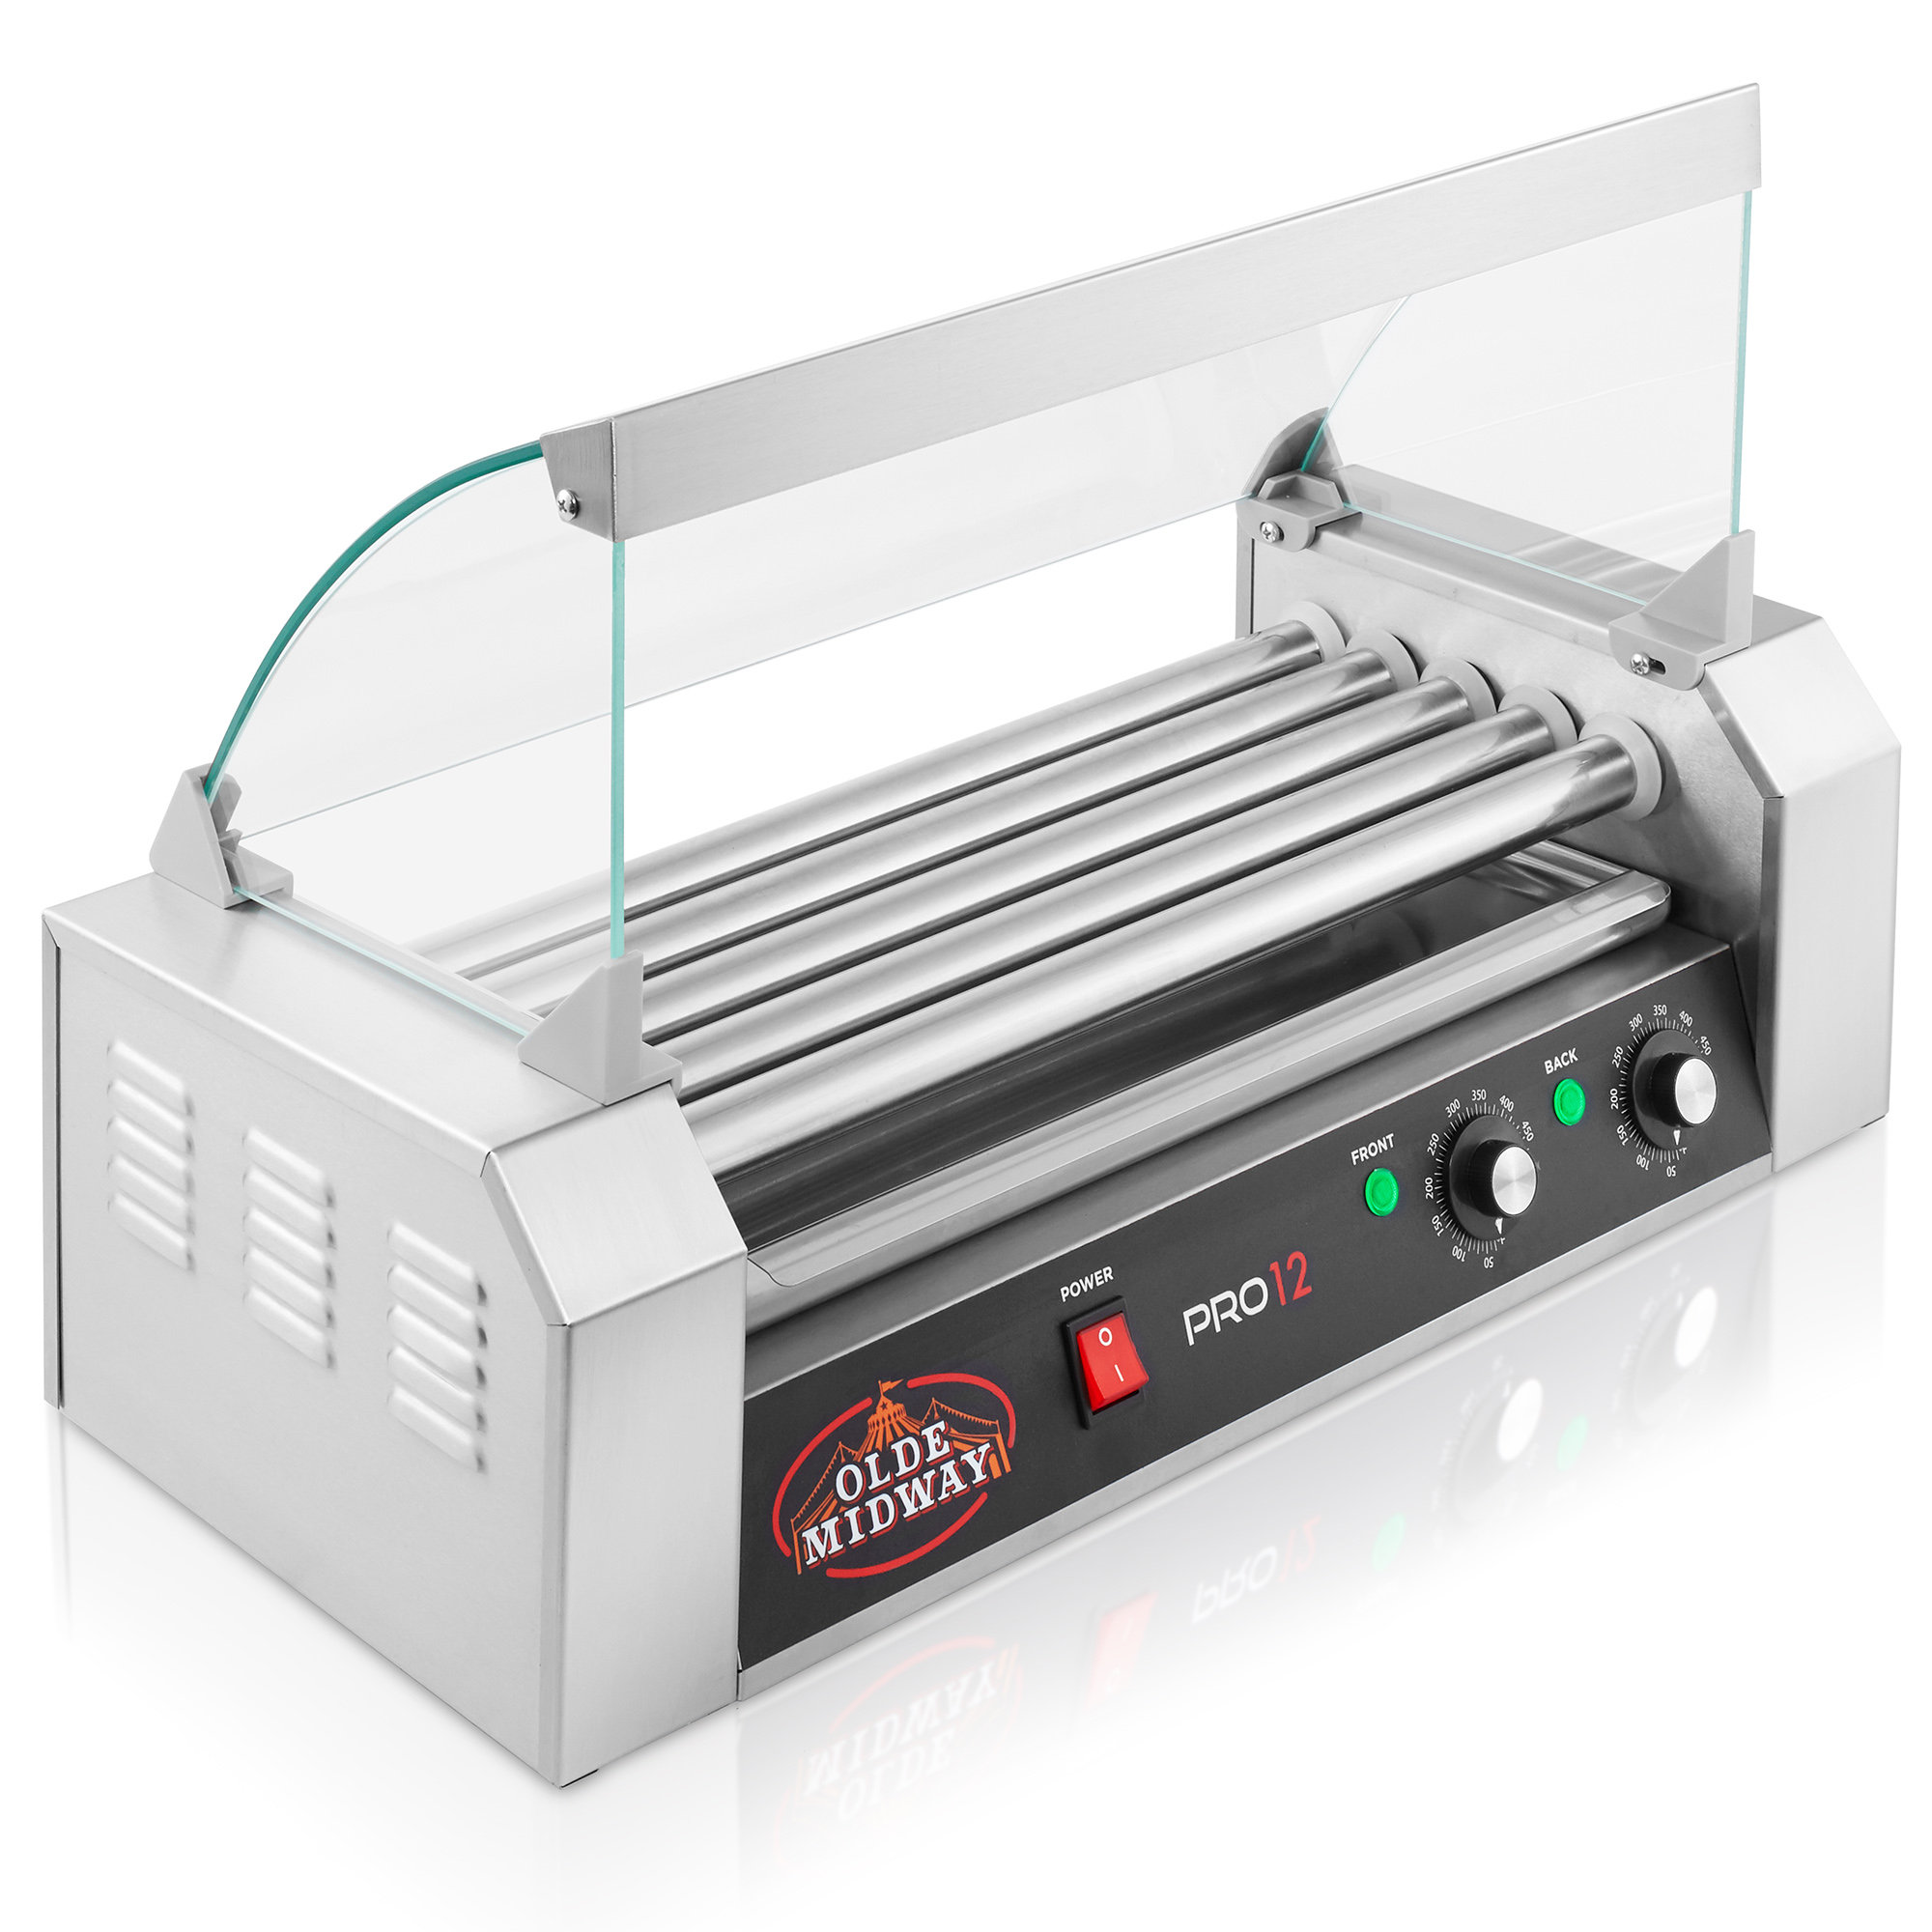 1400W Hot Dog Roller Machine, Dual Temp Control Commercial Electric Contact  Grills with Removable Stainless Steel Drip Tray and Cover, 18 Hot Dog 7